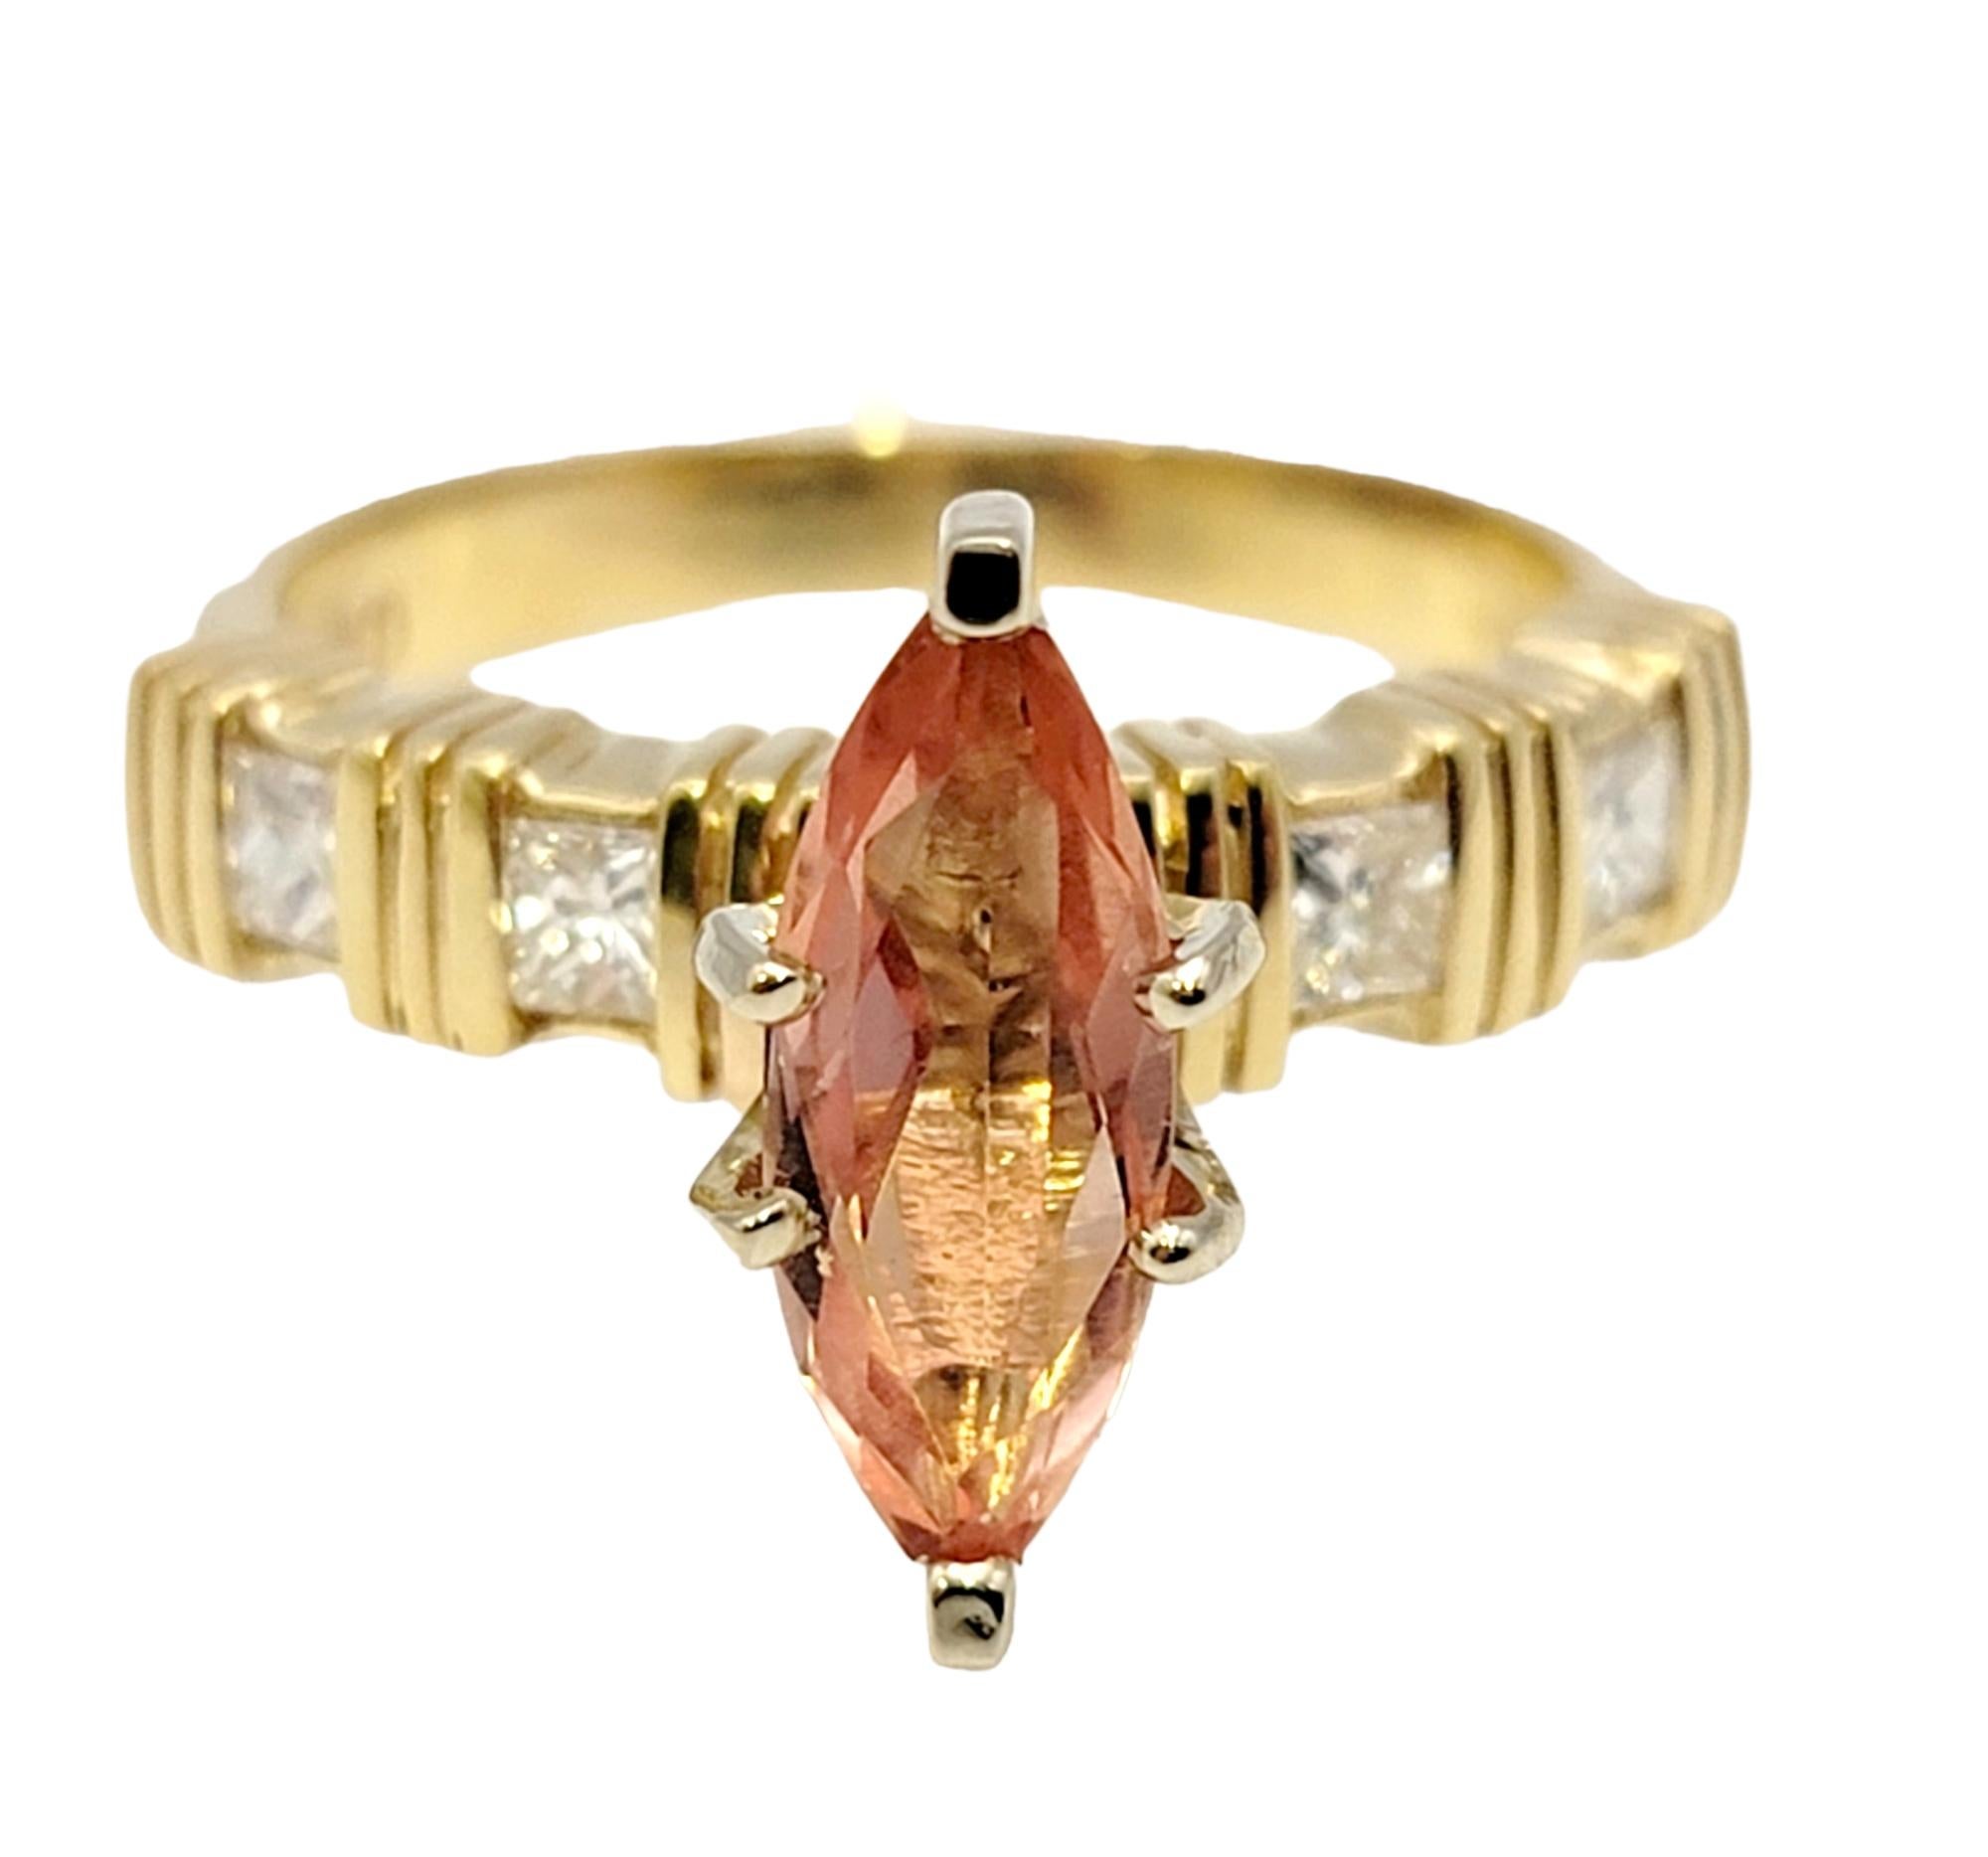 Contemporary Solitaire Marquis Cut Orange Tourmaline and Diamond Ring in 14 Karat Yellow Gold For Sale